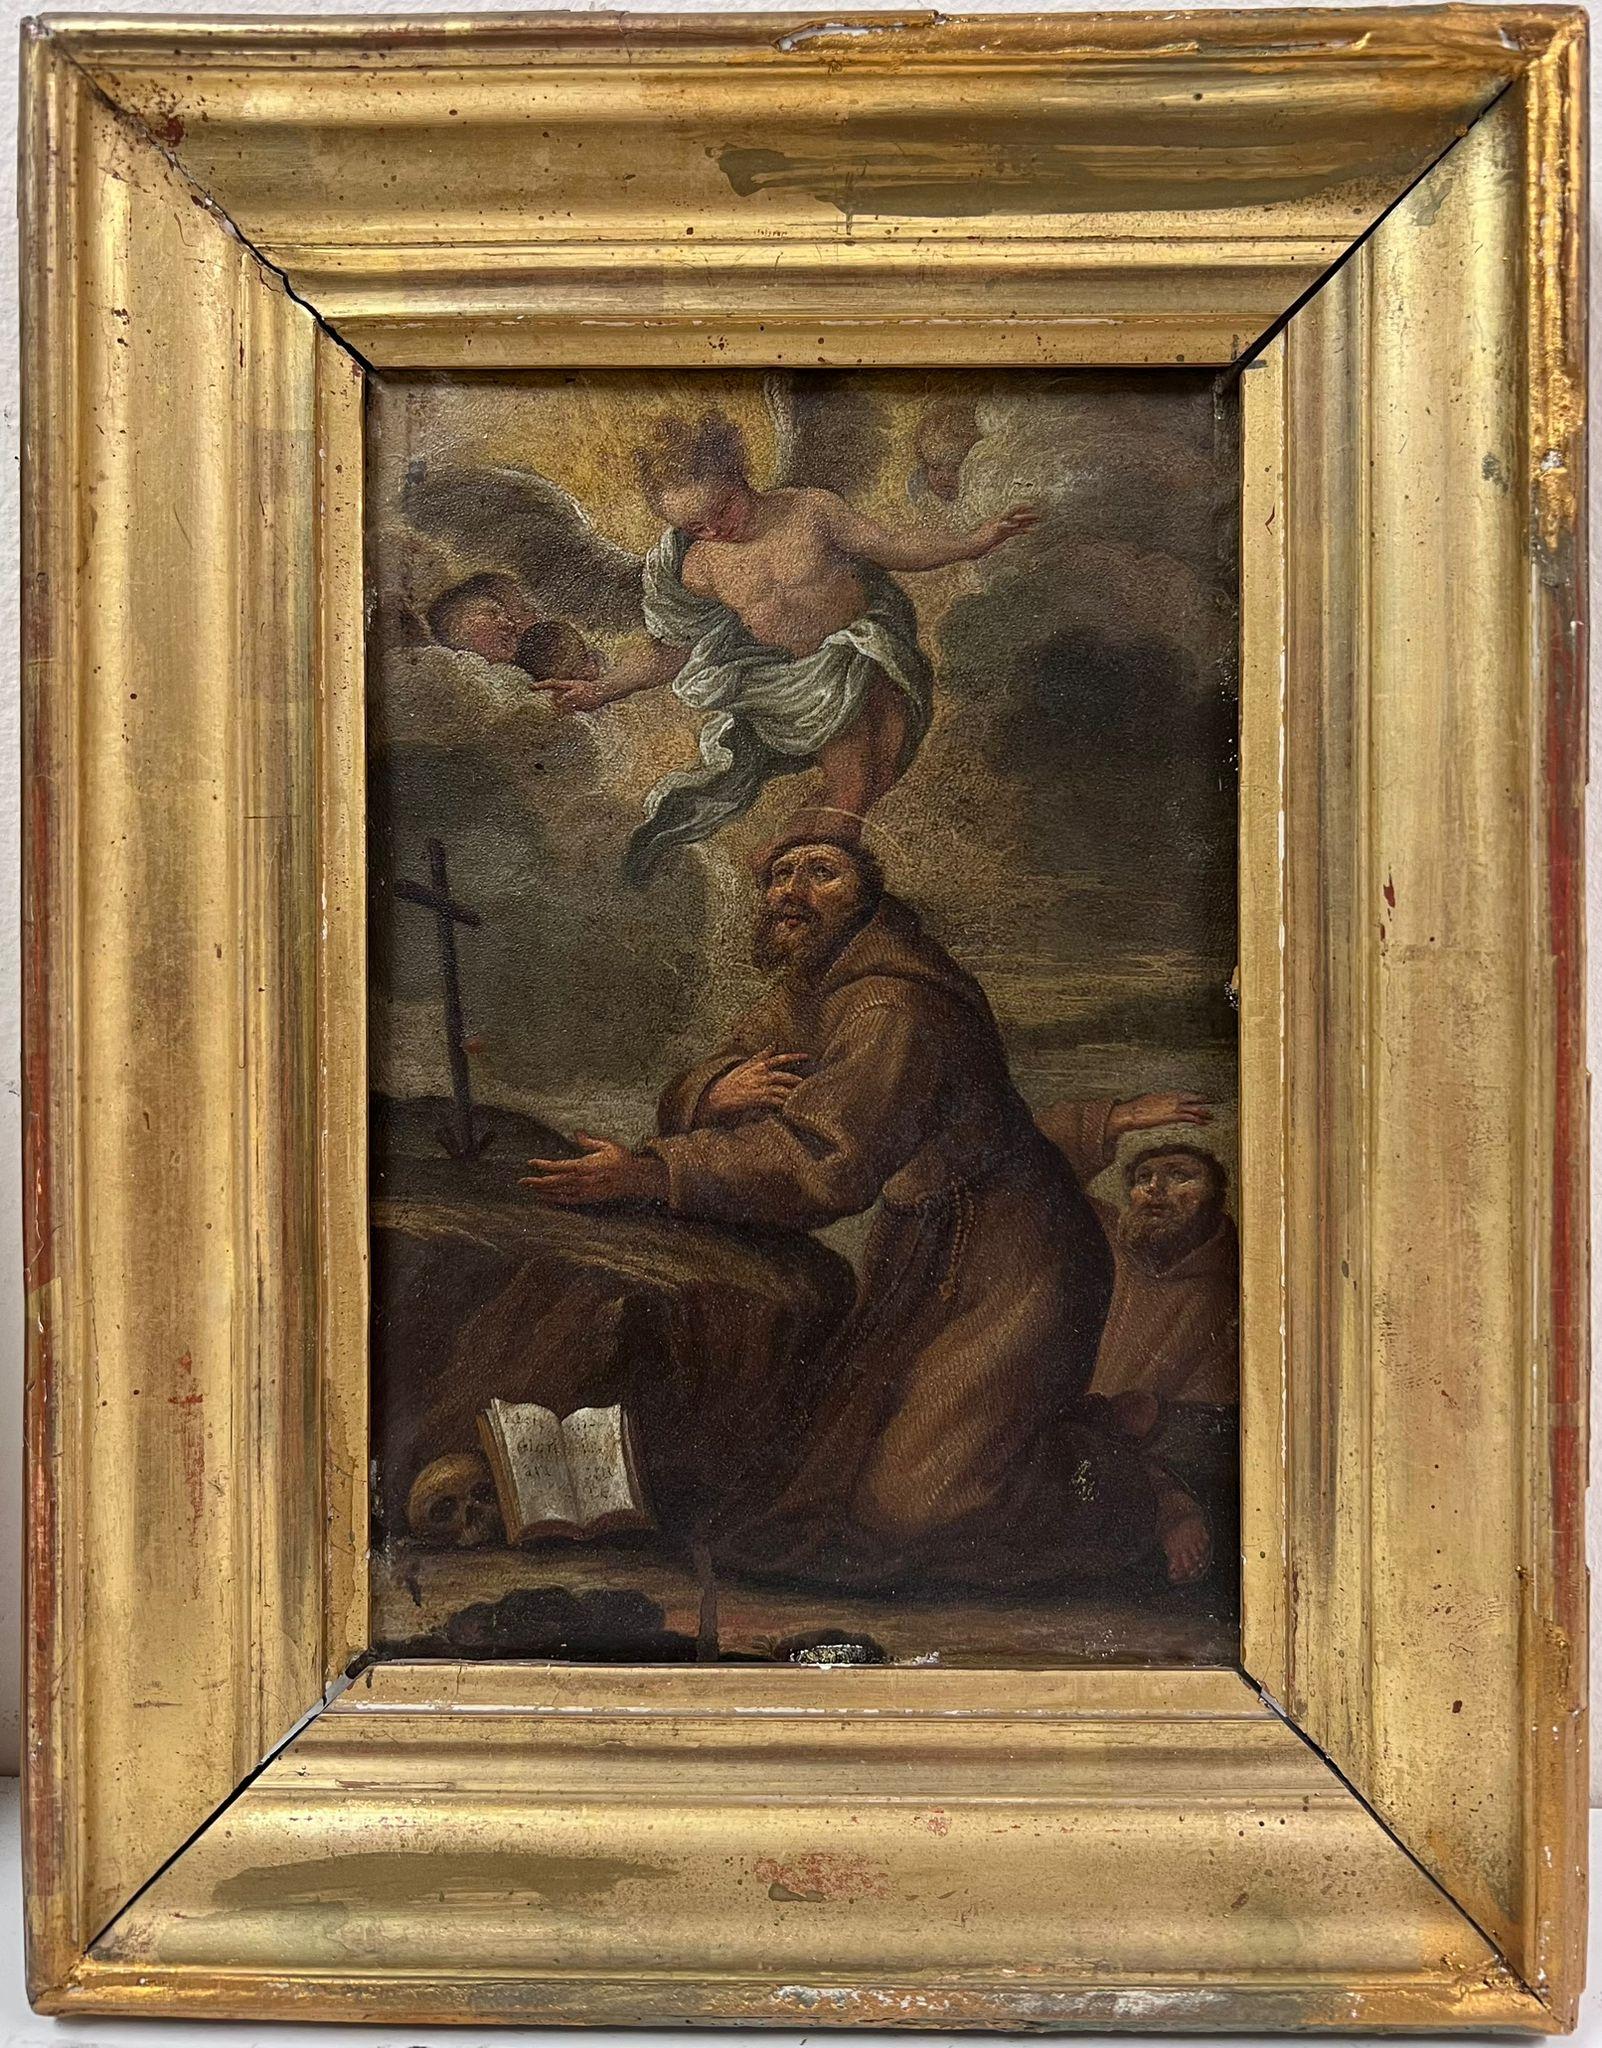 Penitent Saint in Wilderness with Angels & Cherubs Italian Old Master on Copper - Painting by Italian 17th Century Old Master